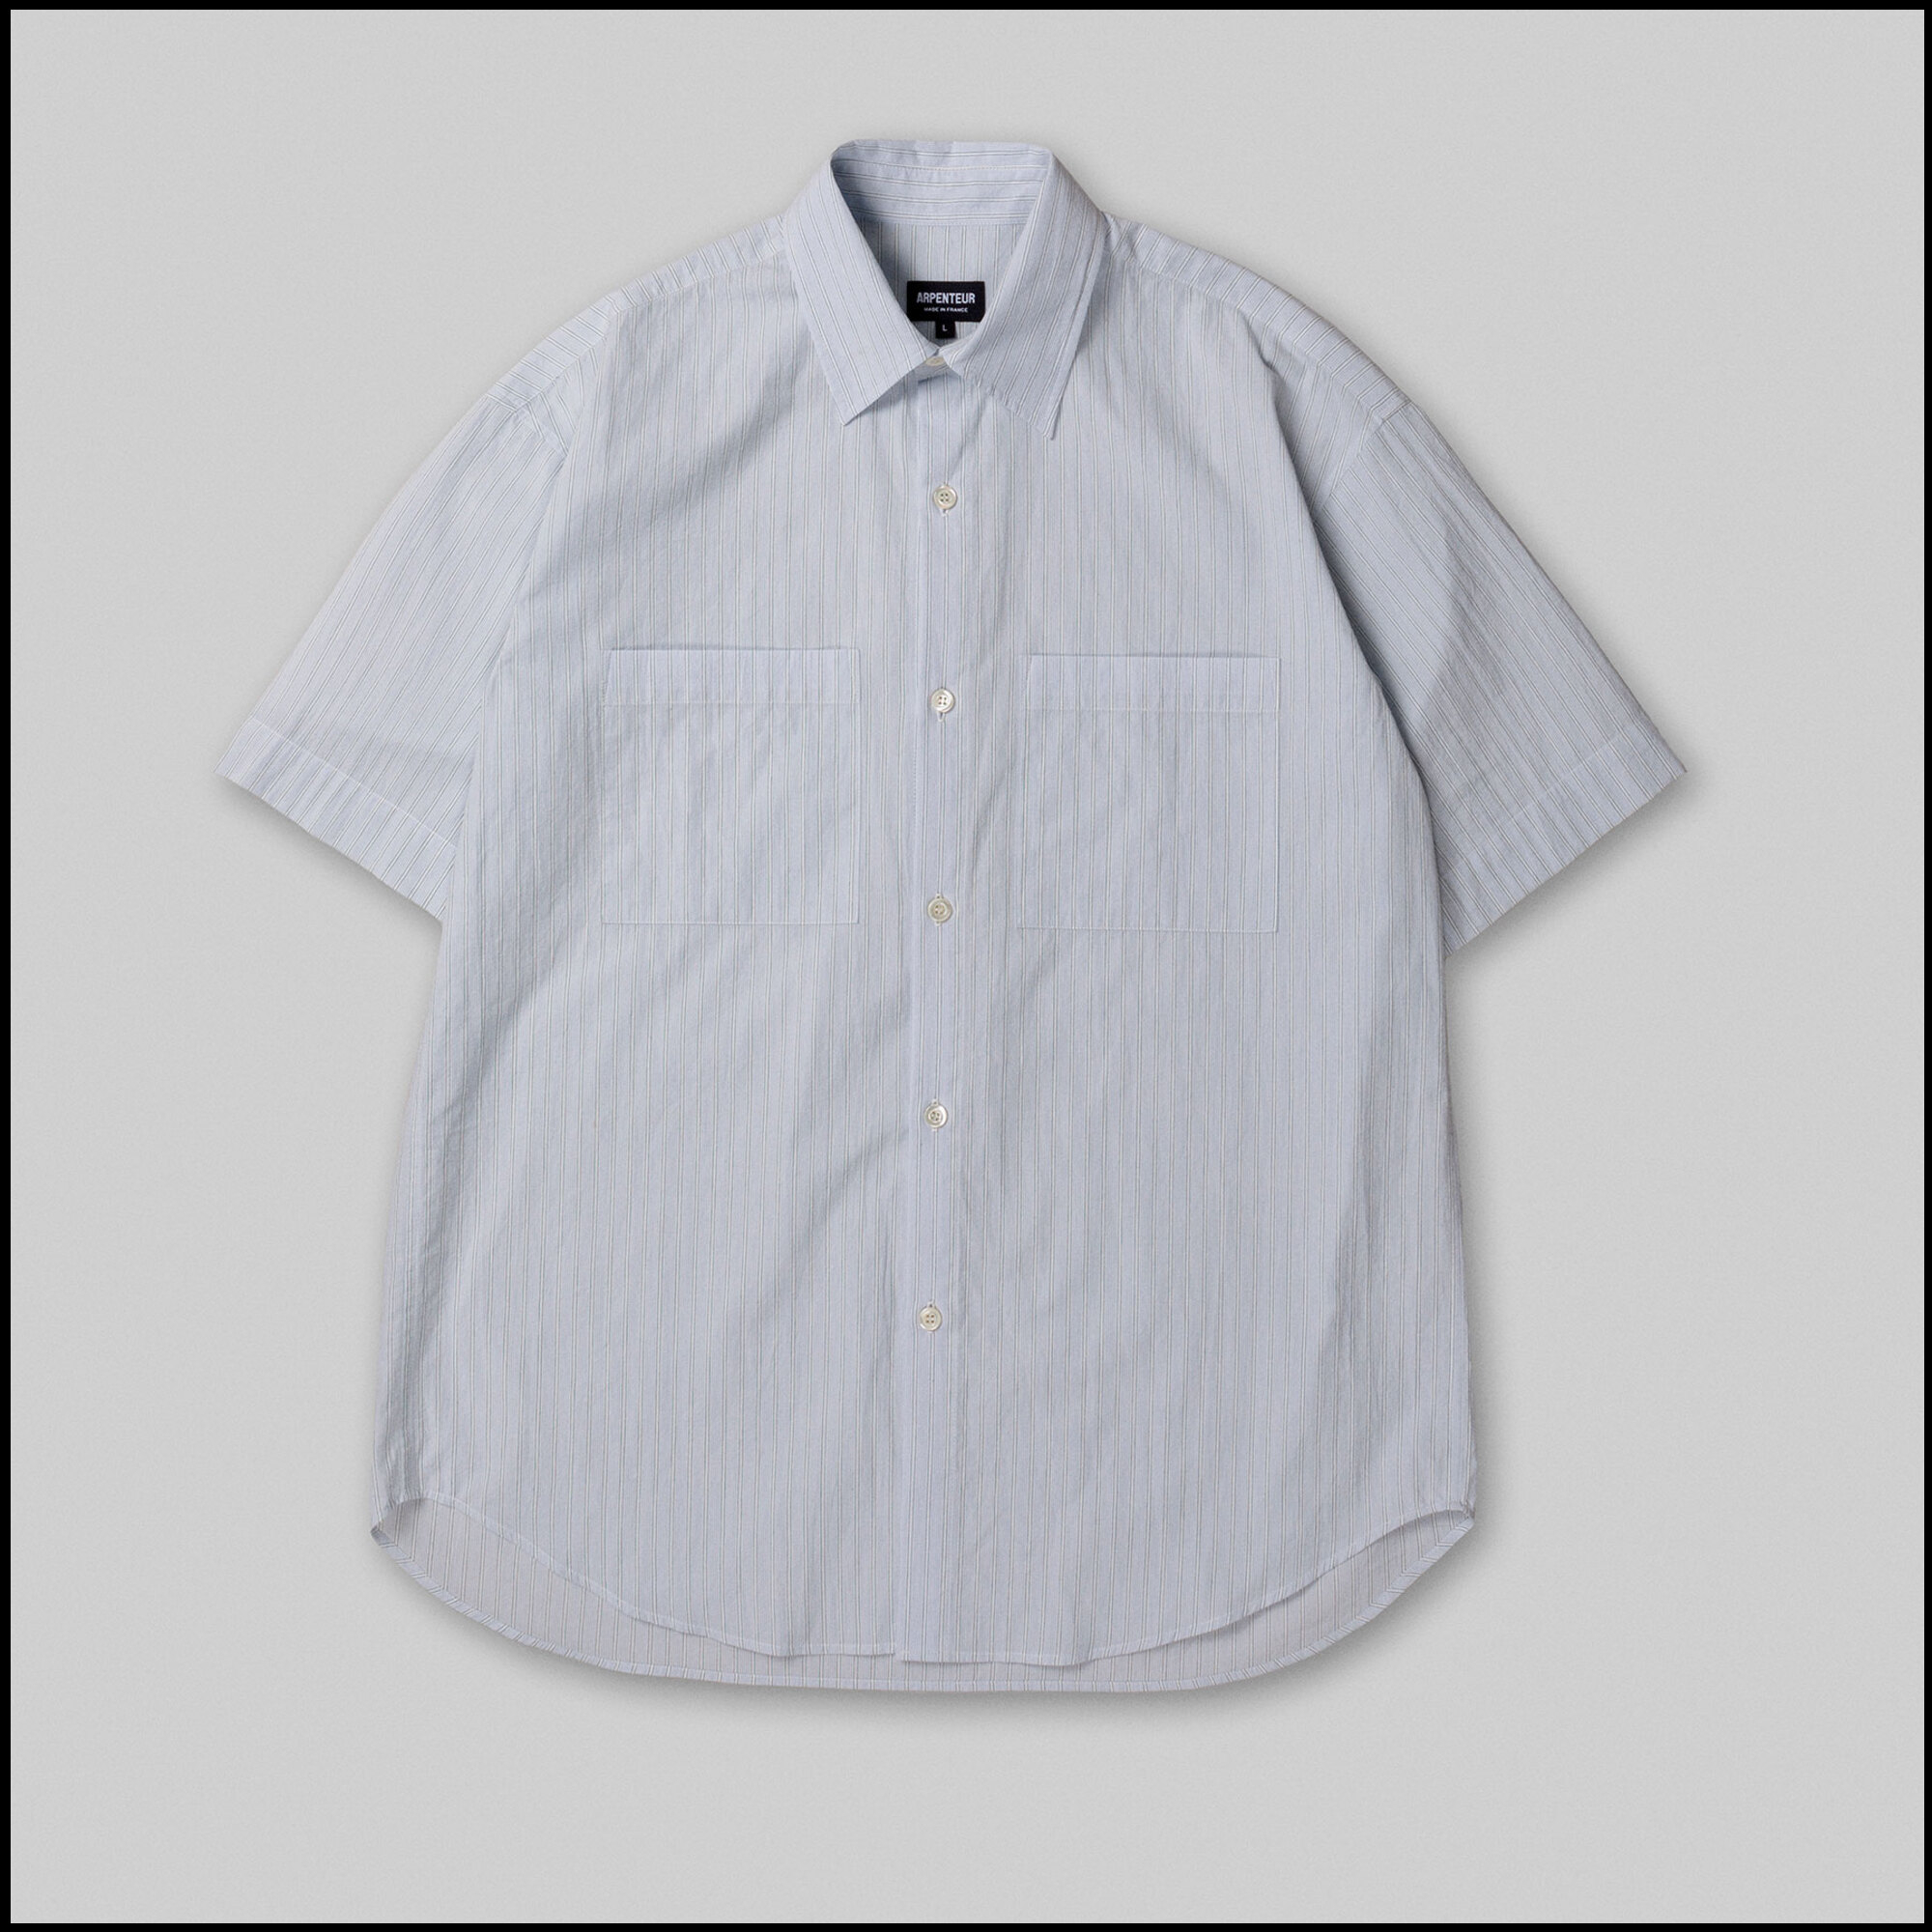 STEREO shirt by Arpenteur in Retro stripes color